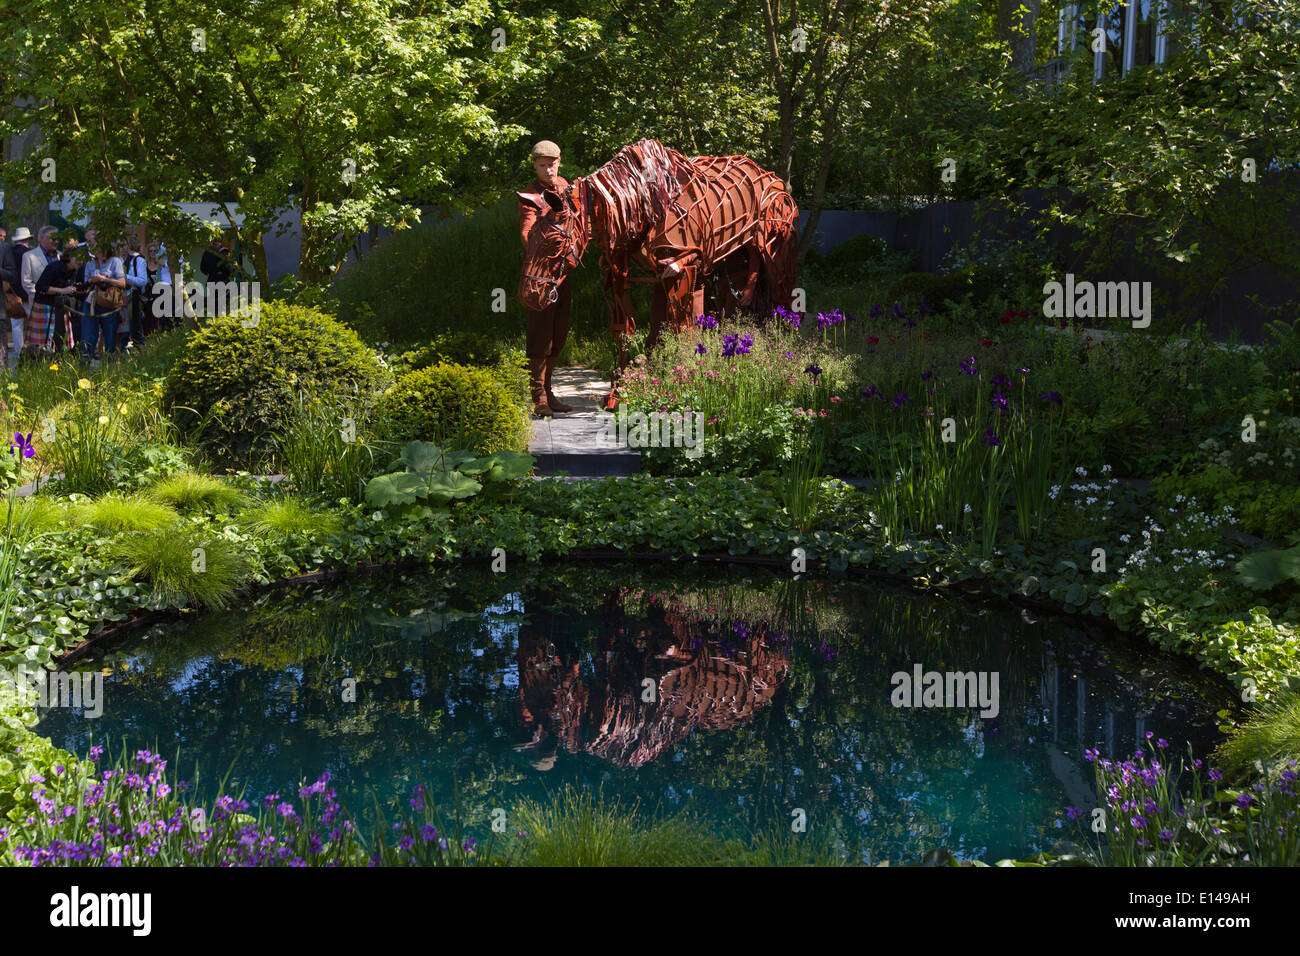 'Joey' the puppet from 'War Horse' stands in 'No Man's Land', a World War 1 Commemorative Garden at Chelsea Flower Show 19.05.14 Stock Photo